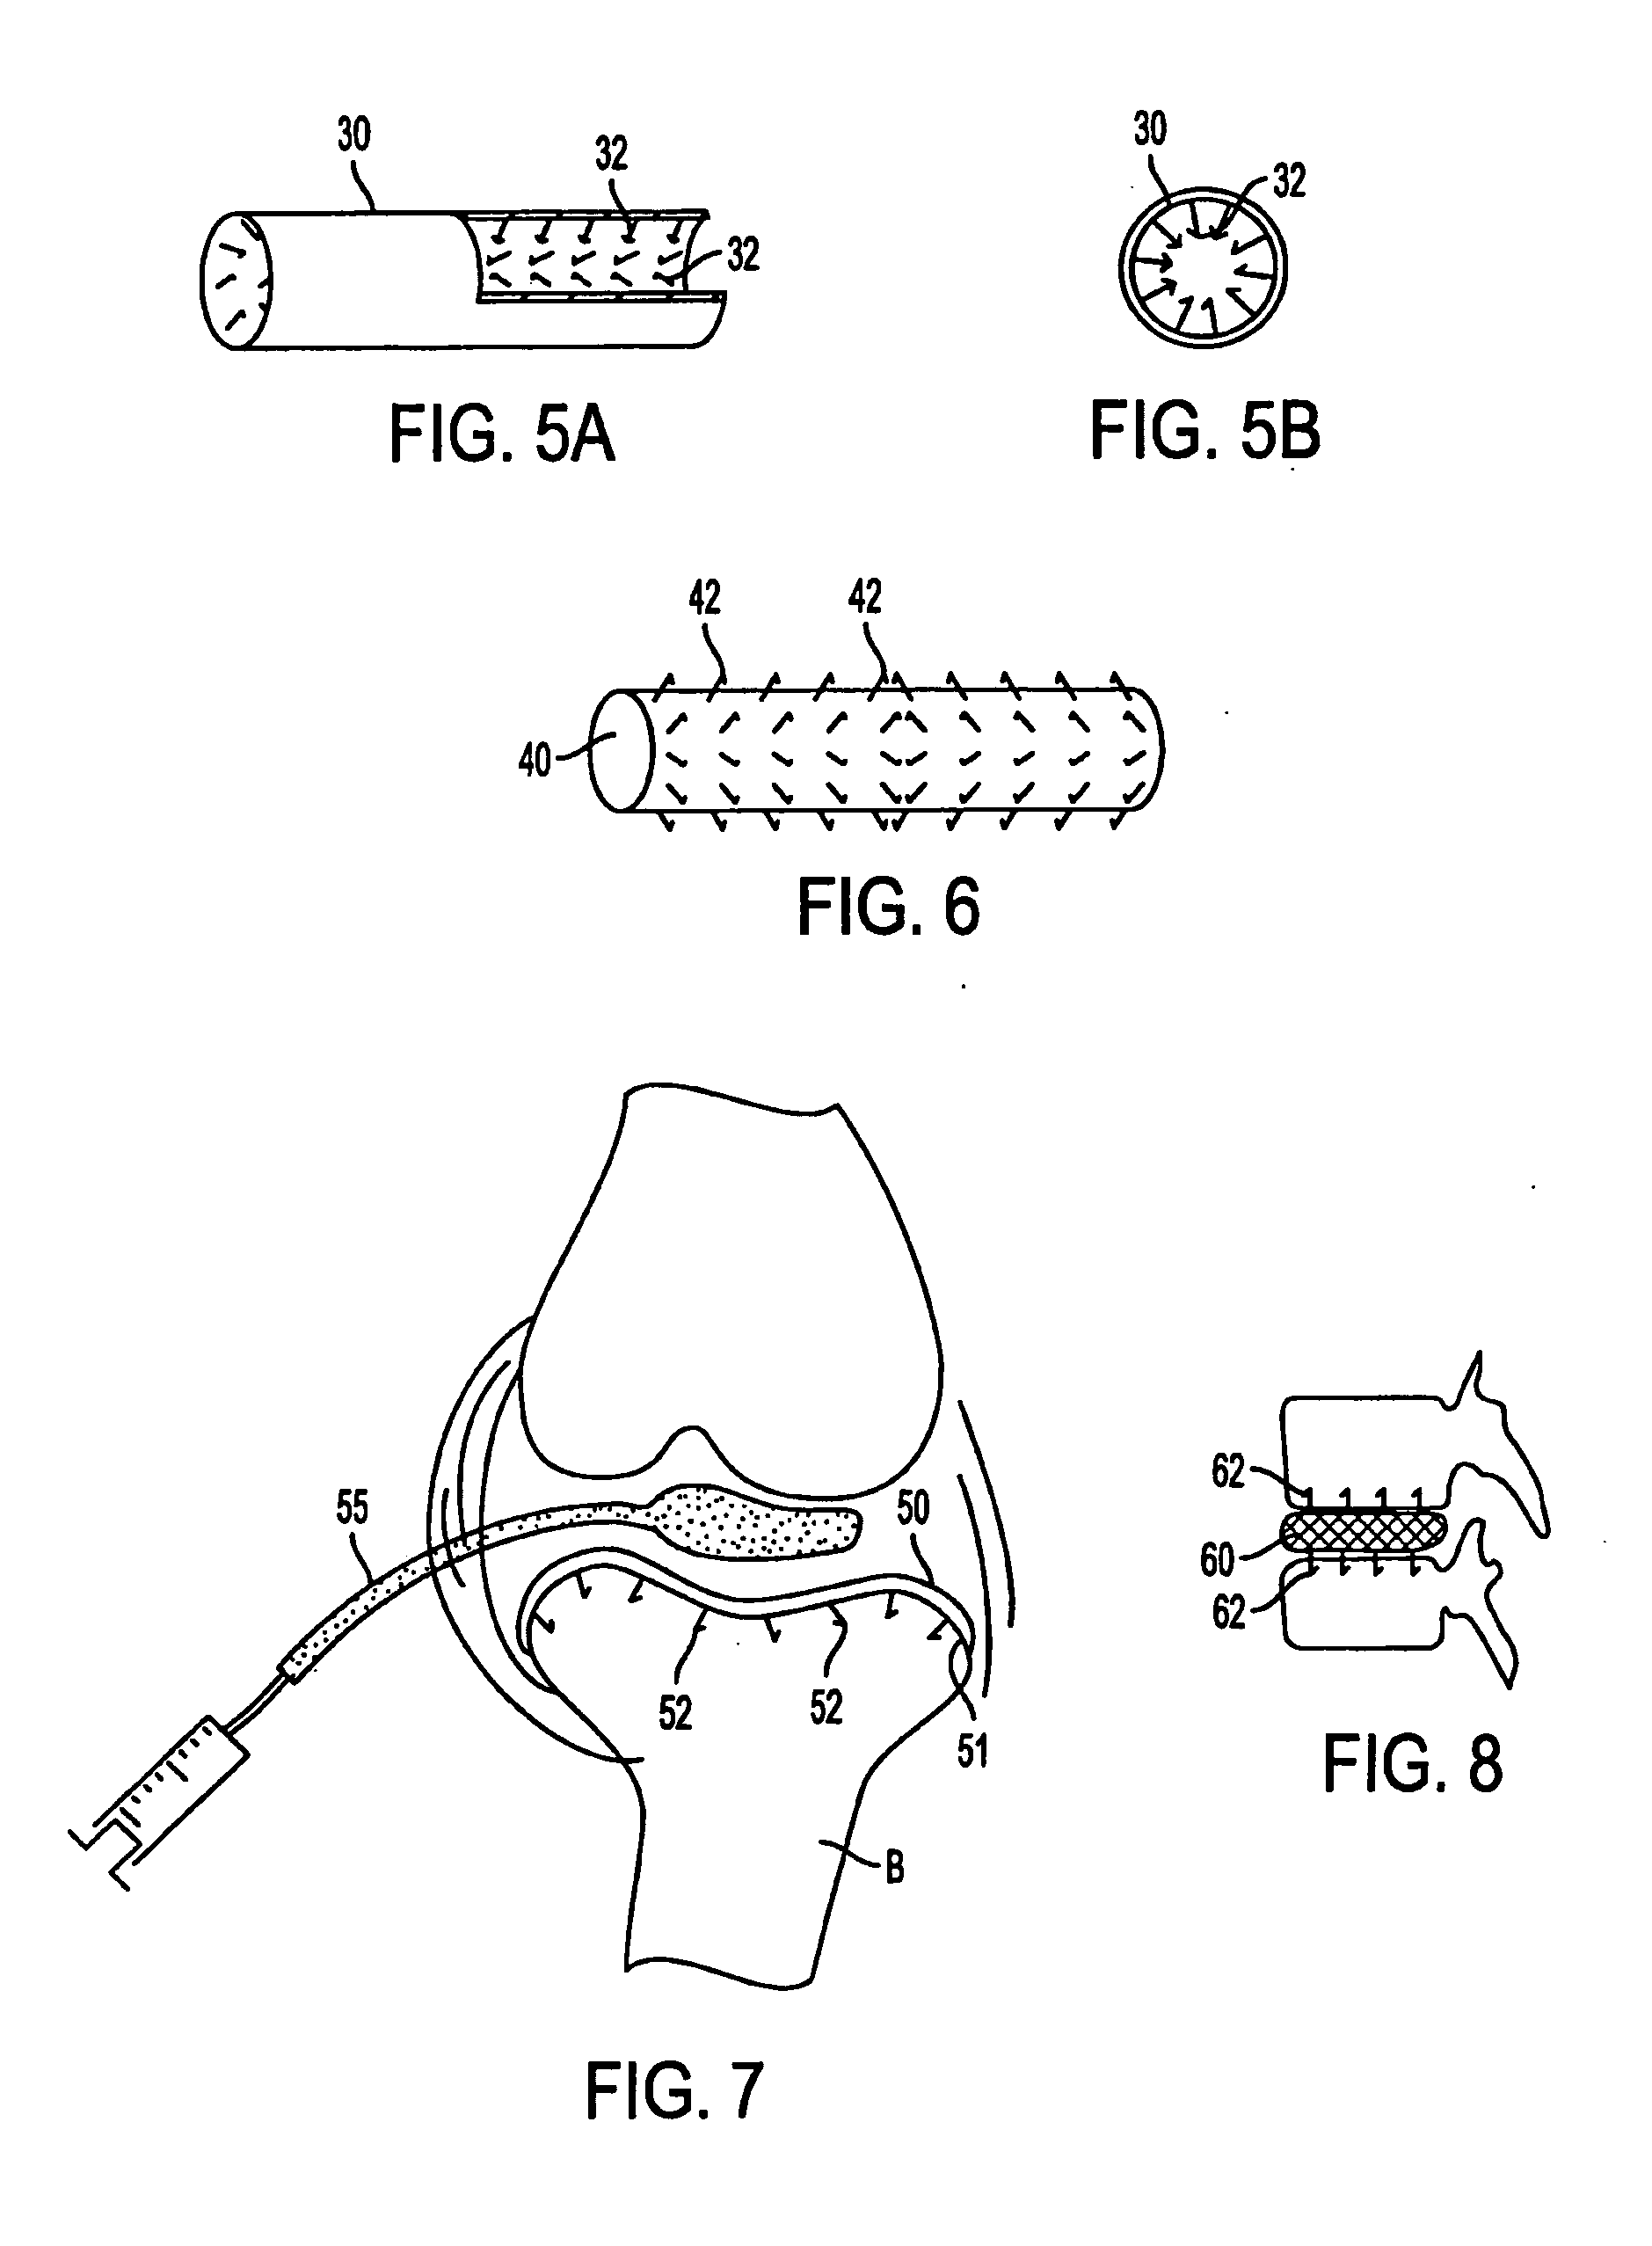 Multi-barbed device for retaining tissue in apposition and methods of use